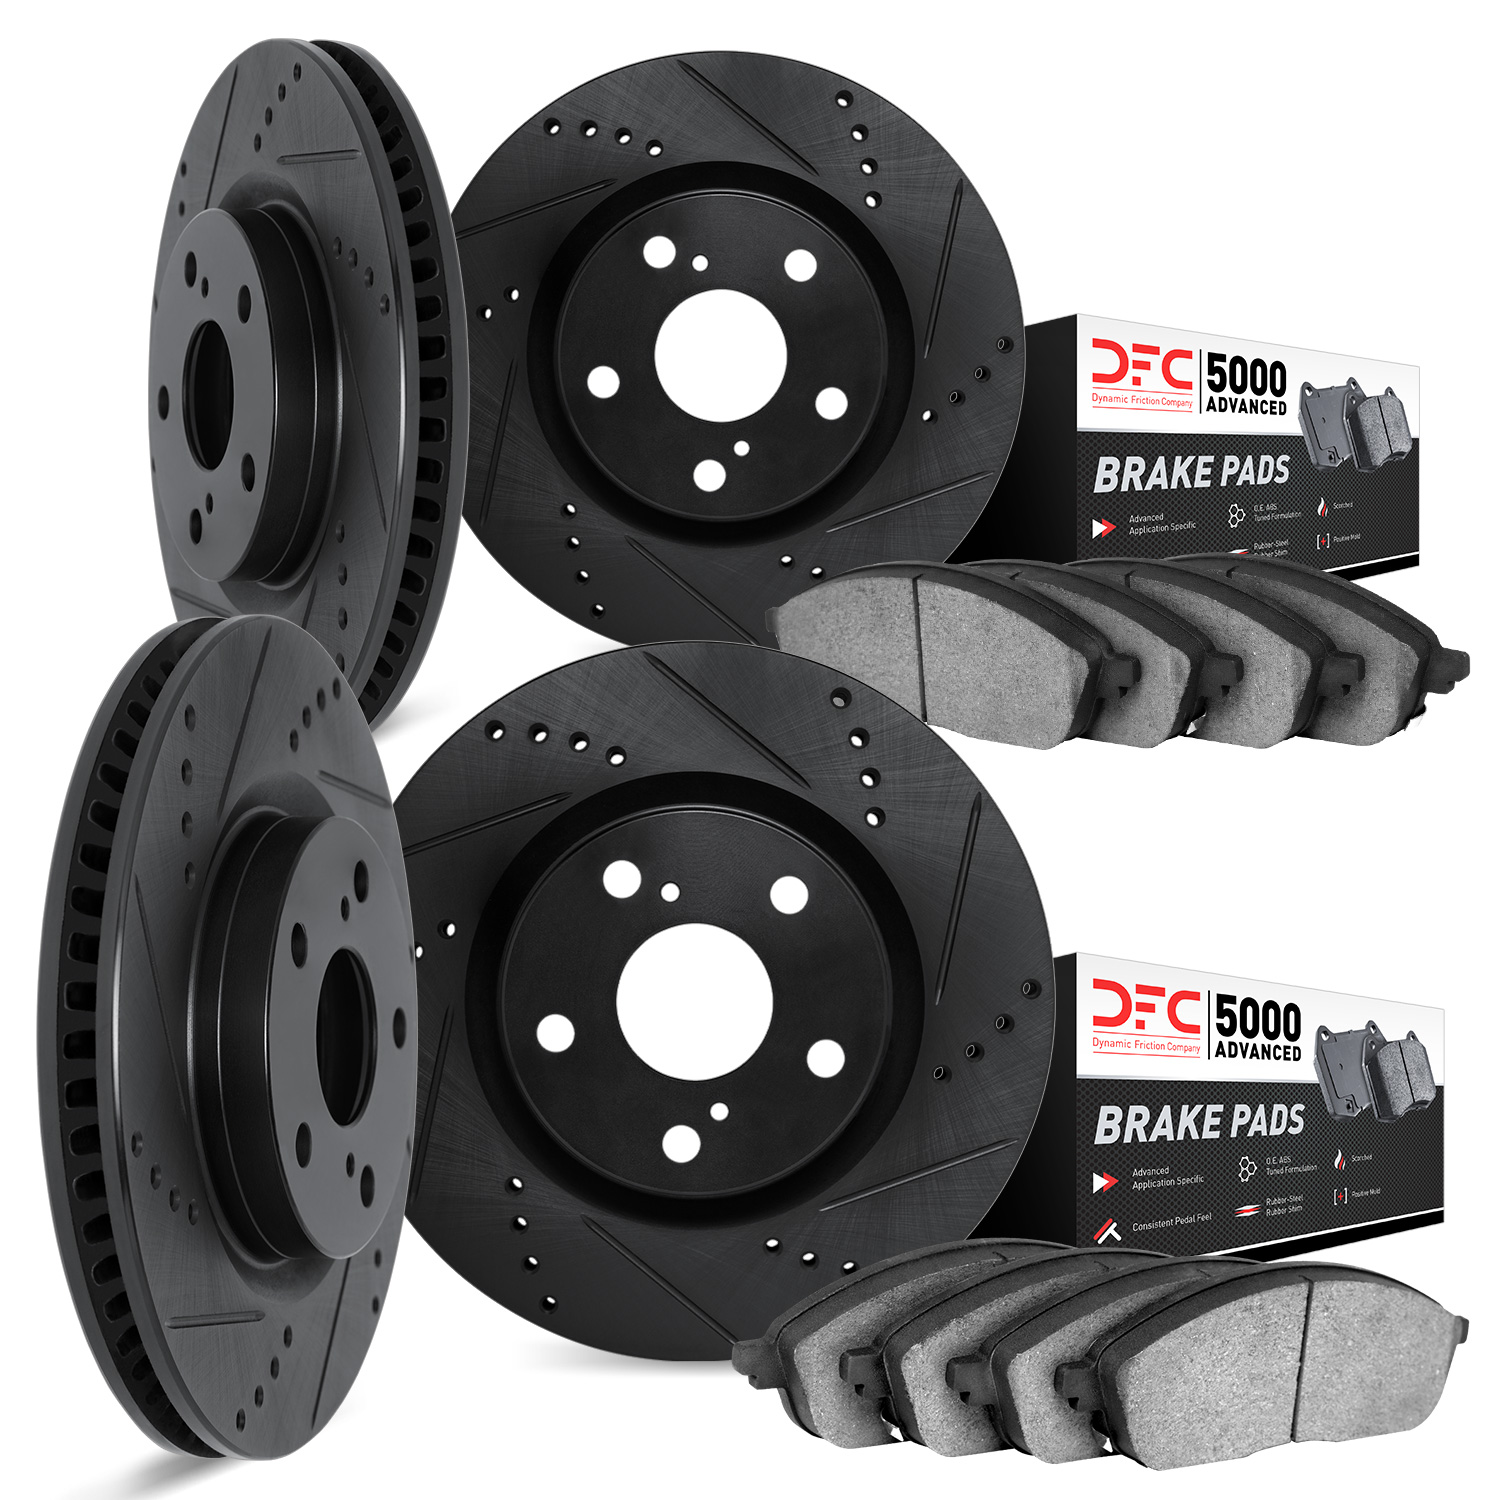 8504-47249 Drilled/Slotted Brake Rotors w/5000 Advanced Brake Pads Kit [Black], 1994-1996 GM, Position: Front and Rear